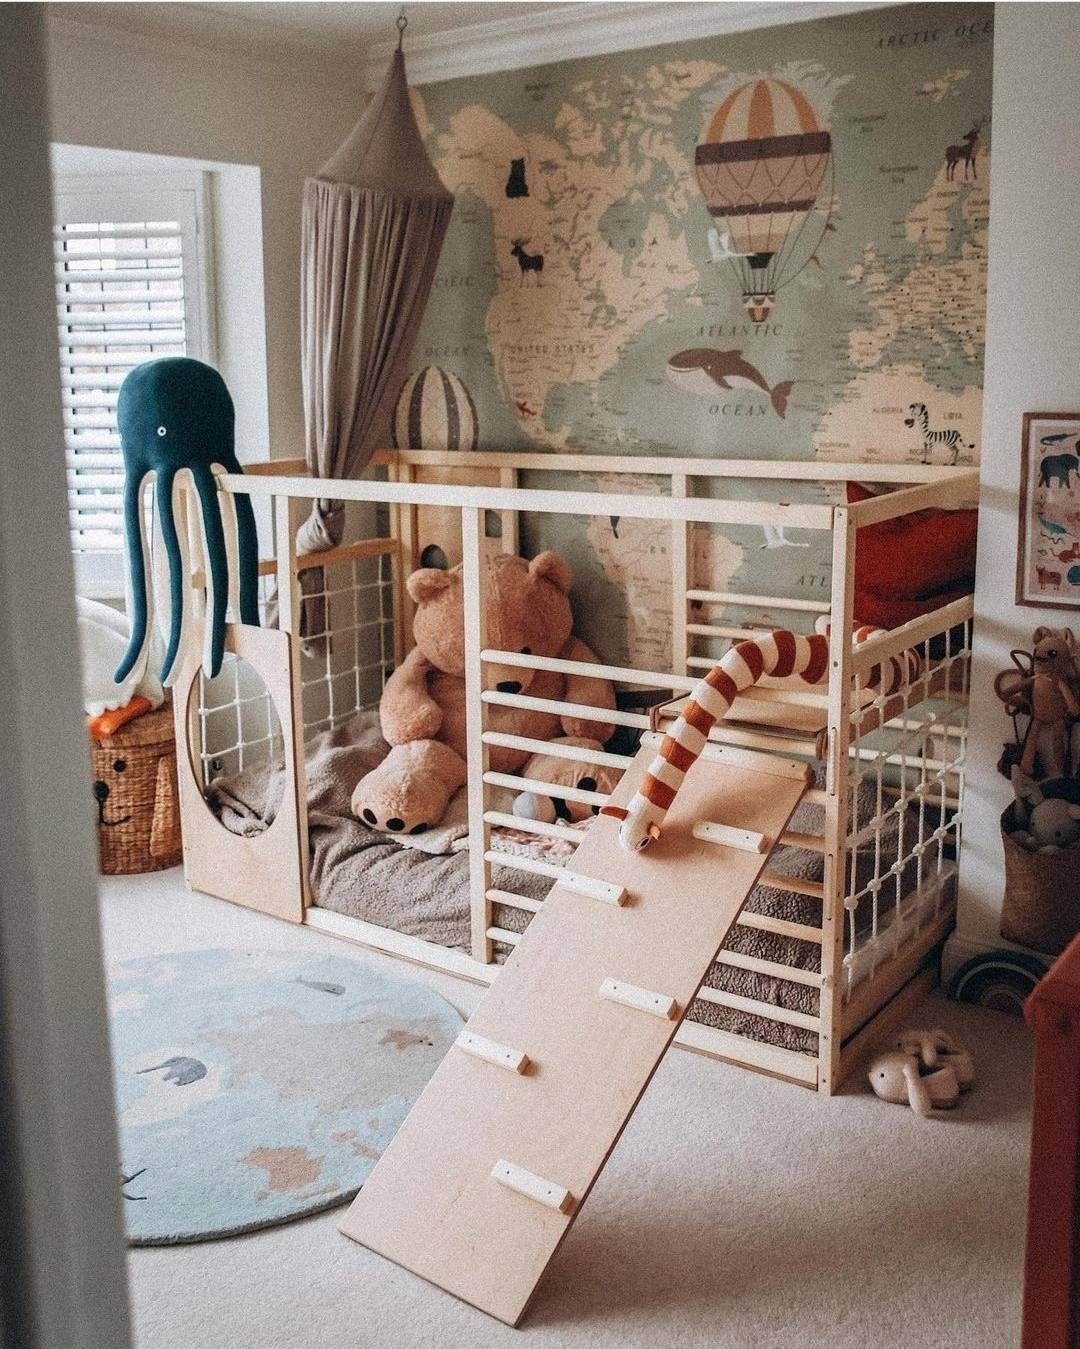 Tips while buying toddler beds